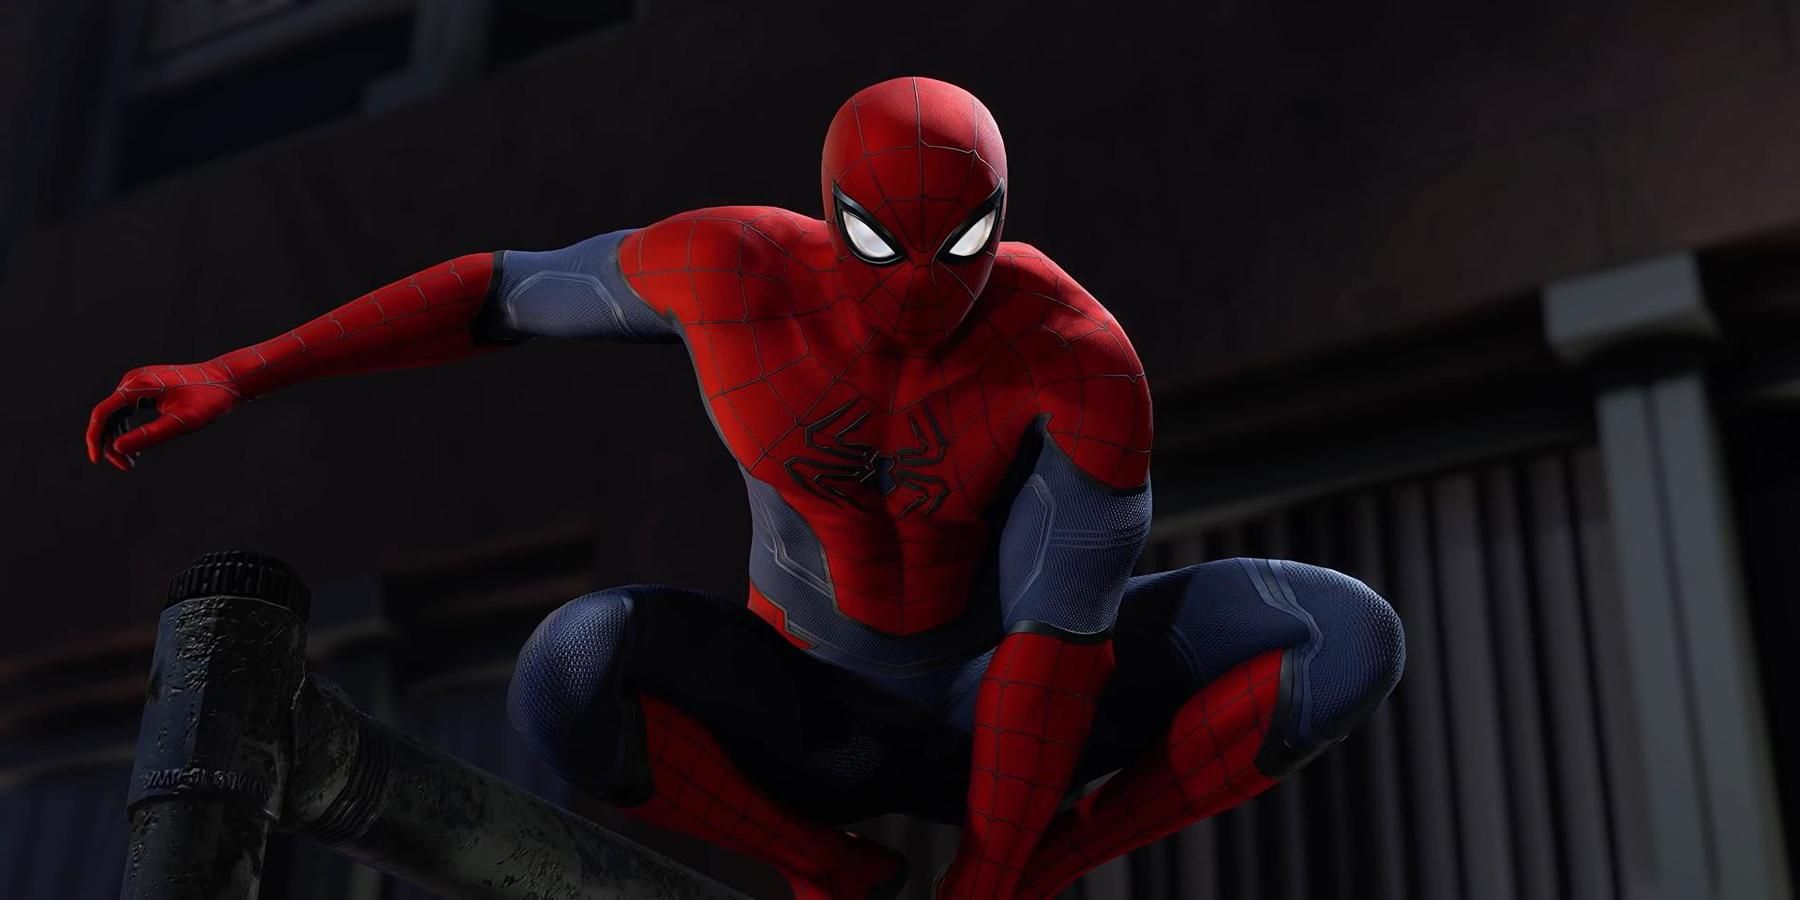 marvels-avengers-spider-man-perched-reveal-trailer